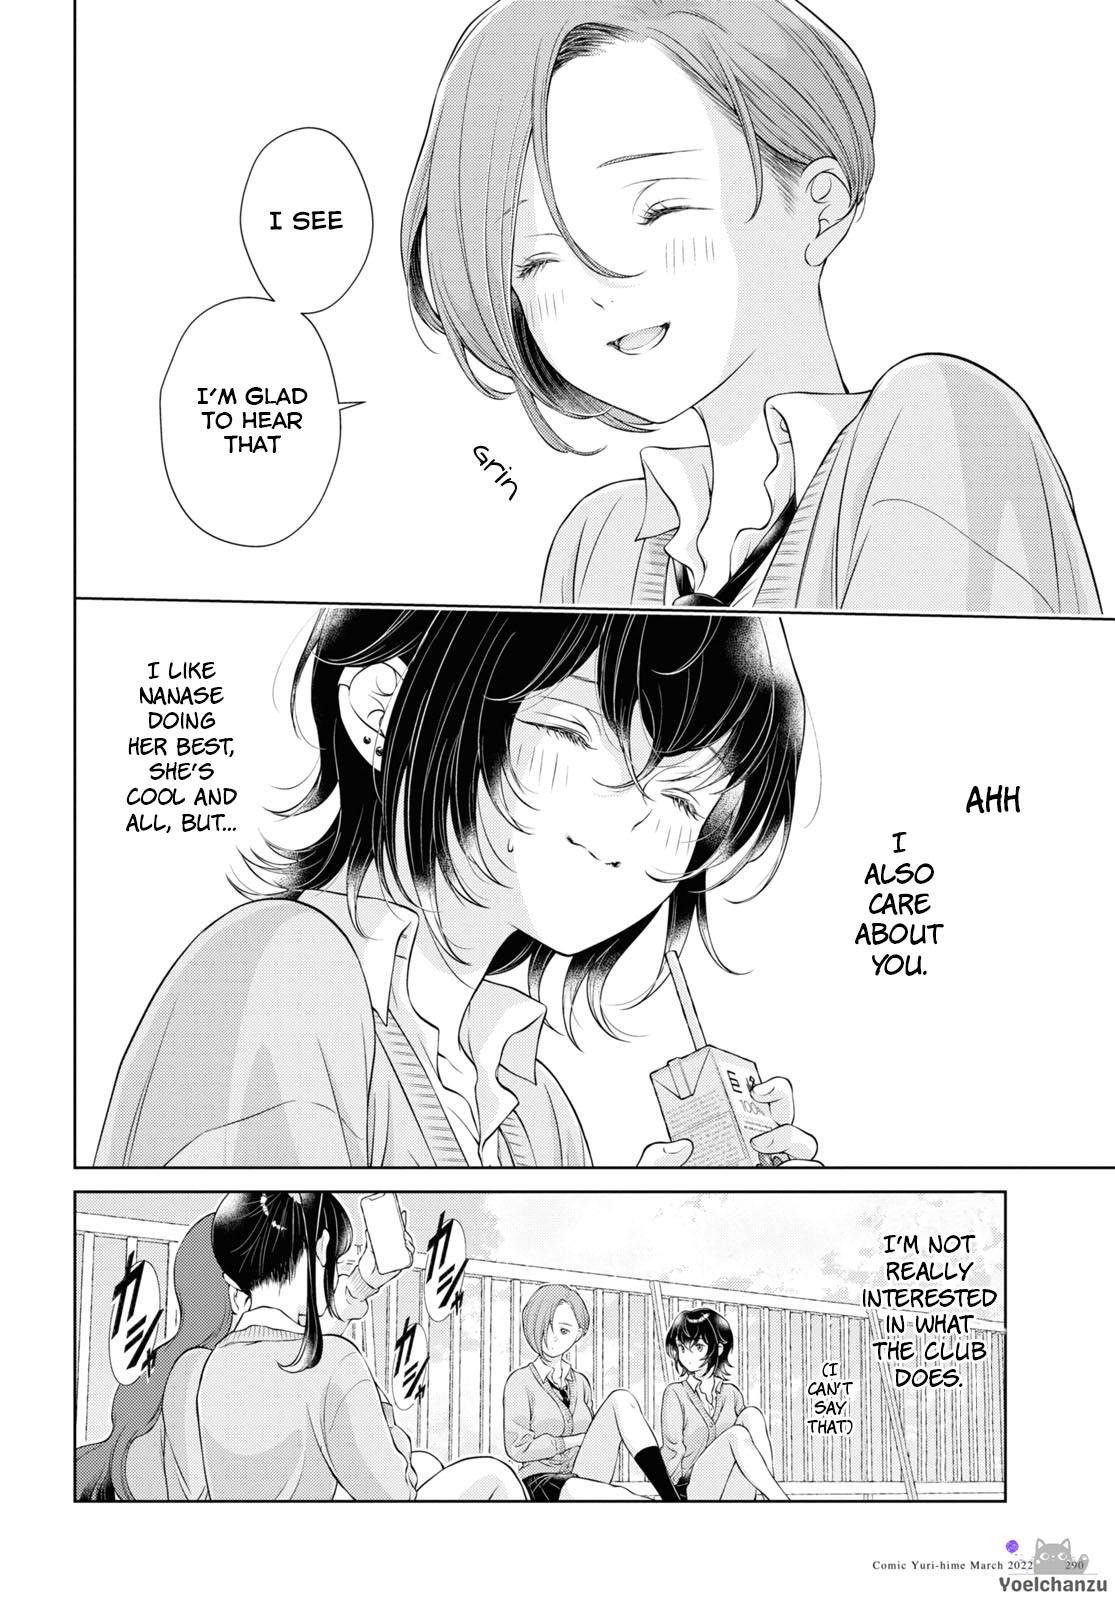 My Girlfriend's Not Here Today Ch. 7-11 + Twitter extras 3